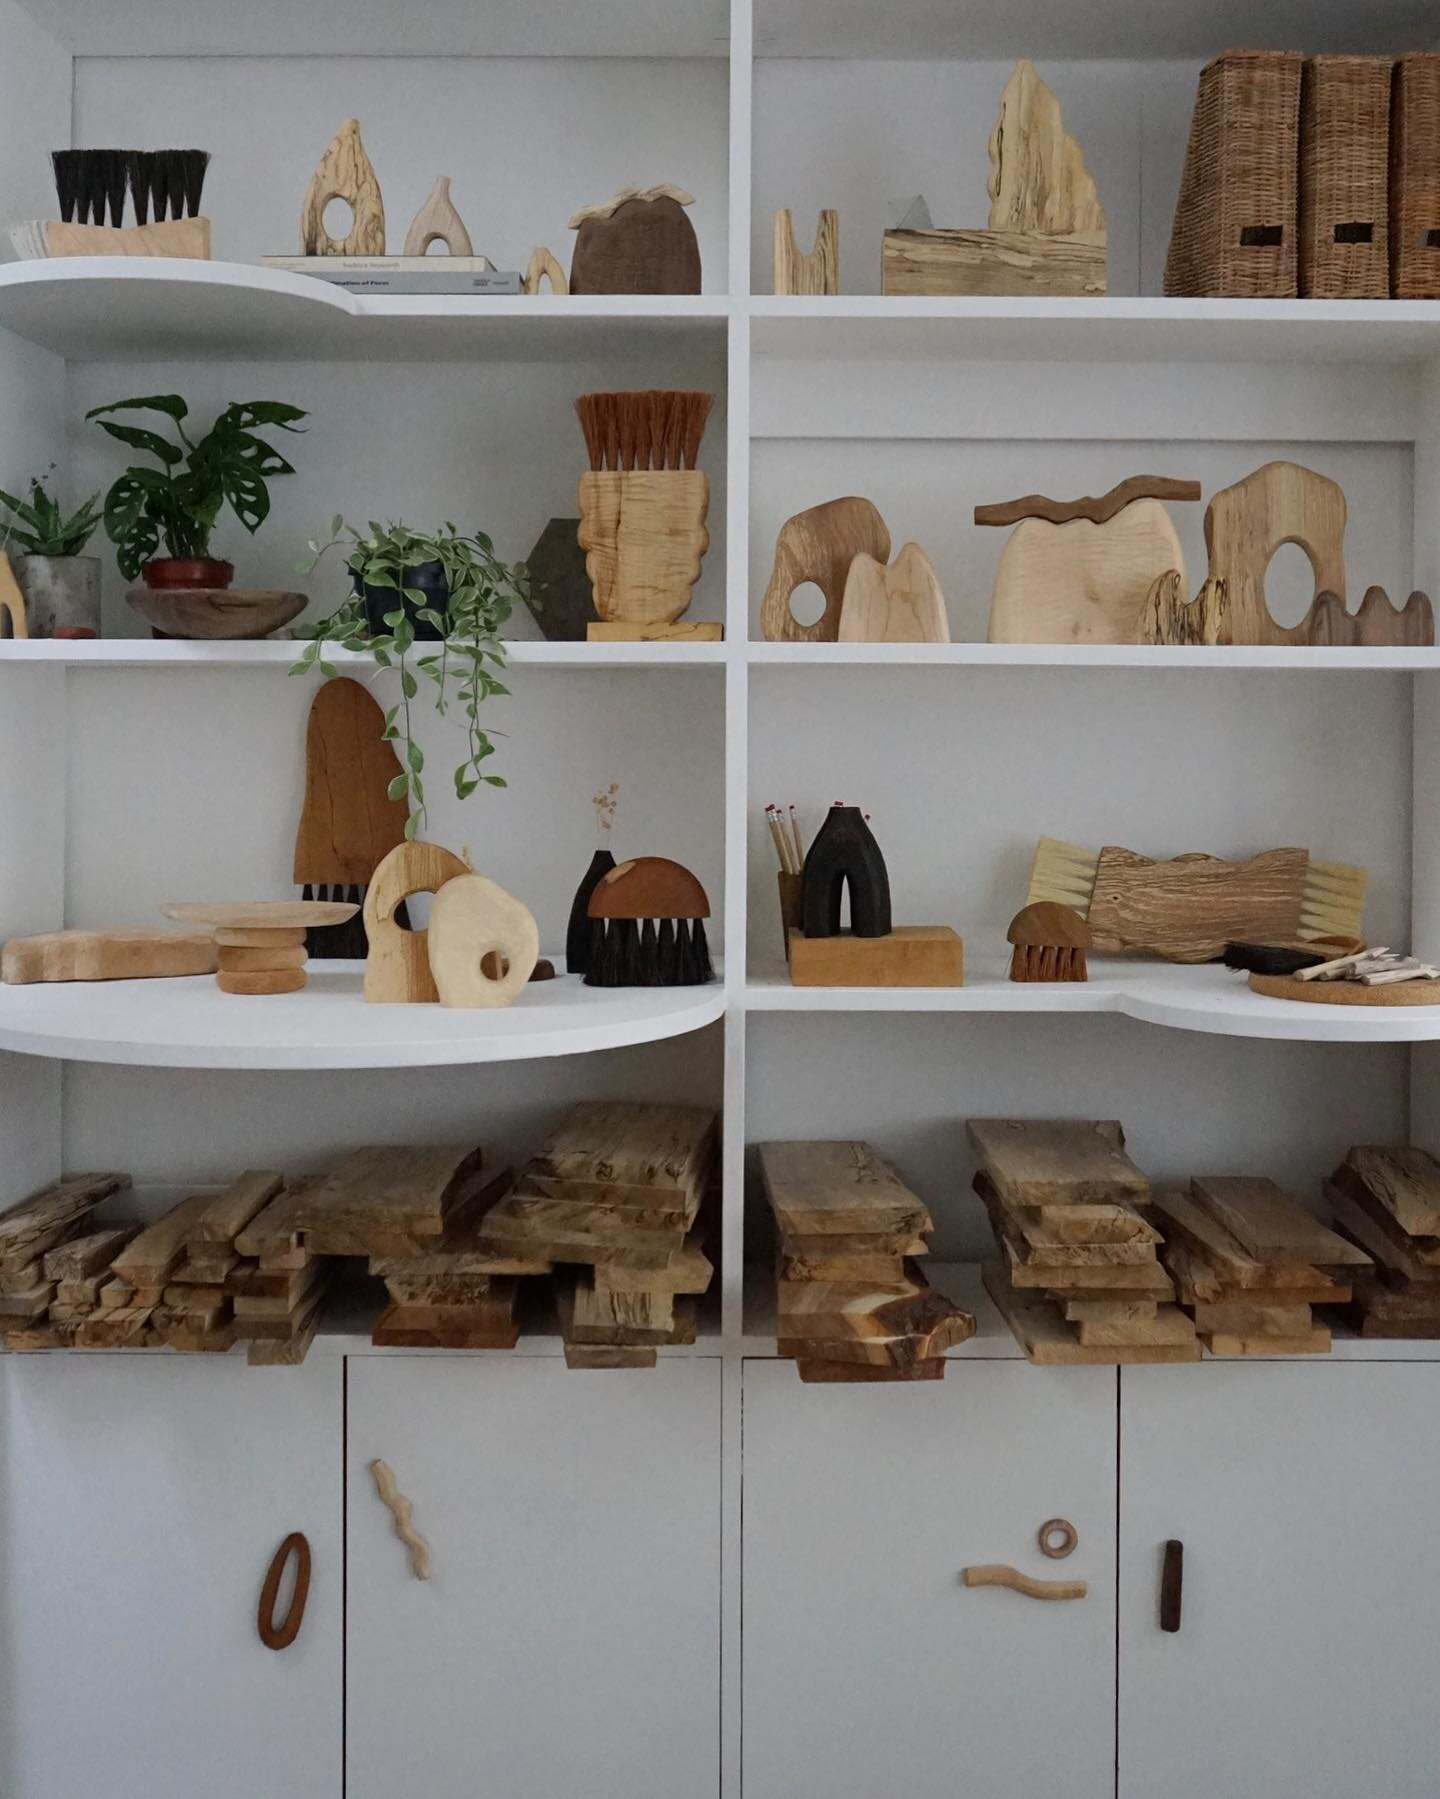 The shelves are filling up, lots of things still to make. Over the next few days I&rsquo;m hoping to open up a booking system so you can come and visit my studio! Make sure you are signed up to my mailing list at the bottom of my website for early ac